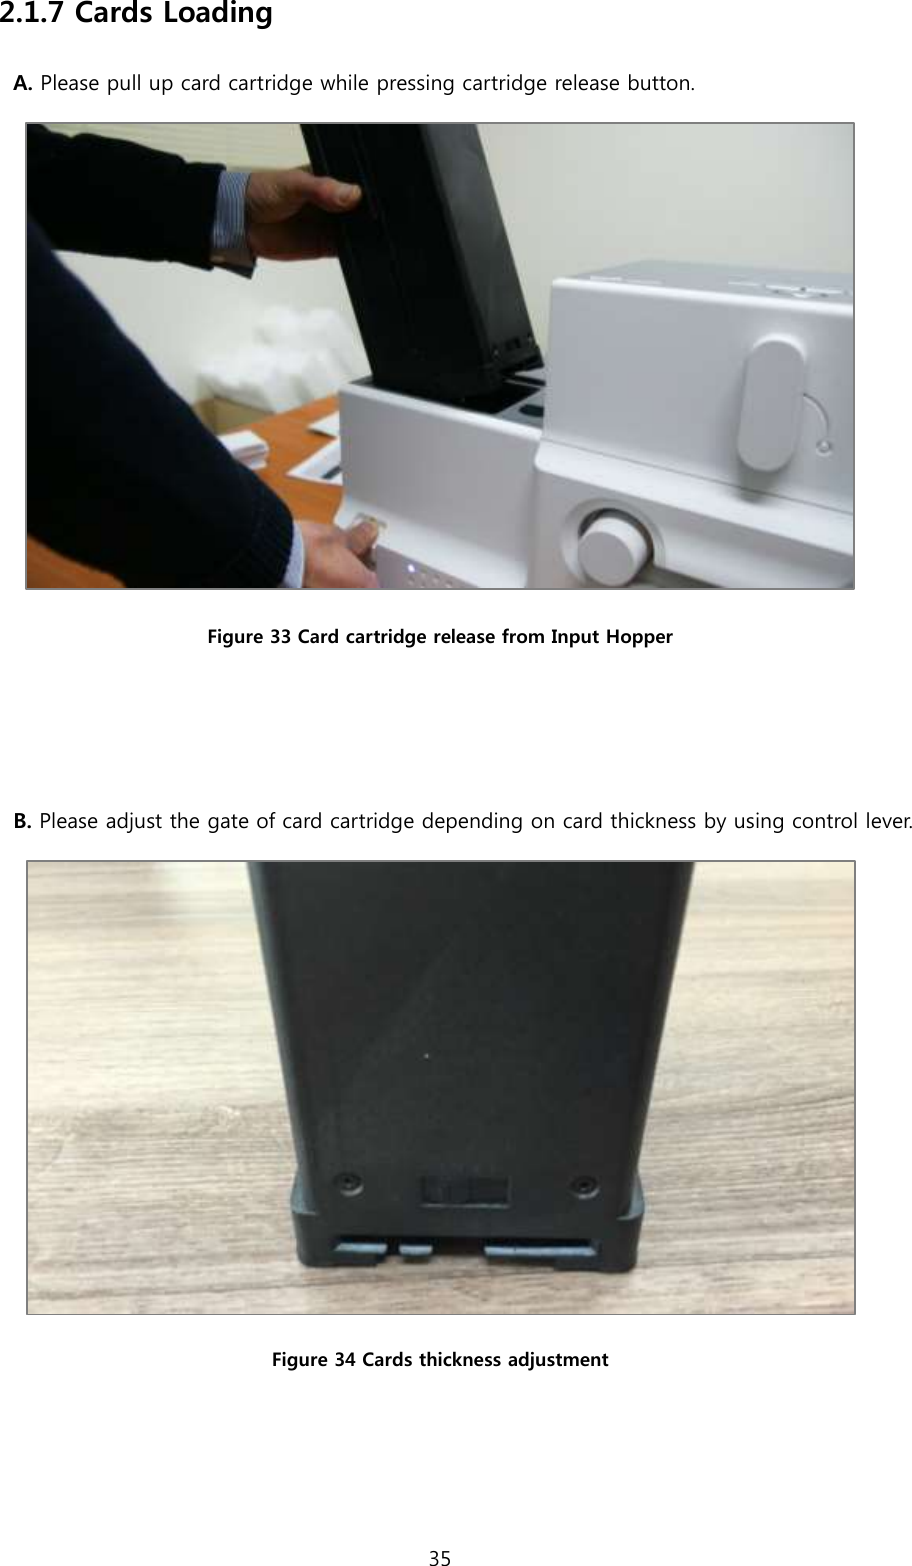 35  2.1.7 Cards Loading A. Please pull up card cartridge while pressing cartridge release button.  Figure 33 Card cartridge release from Input Hopper   B. Please adjust the gate of card cartridge depending on card thickness by using control lever.  Figure 34 Cards thickness adjustment   